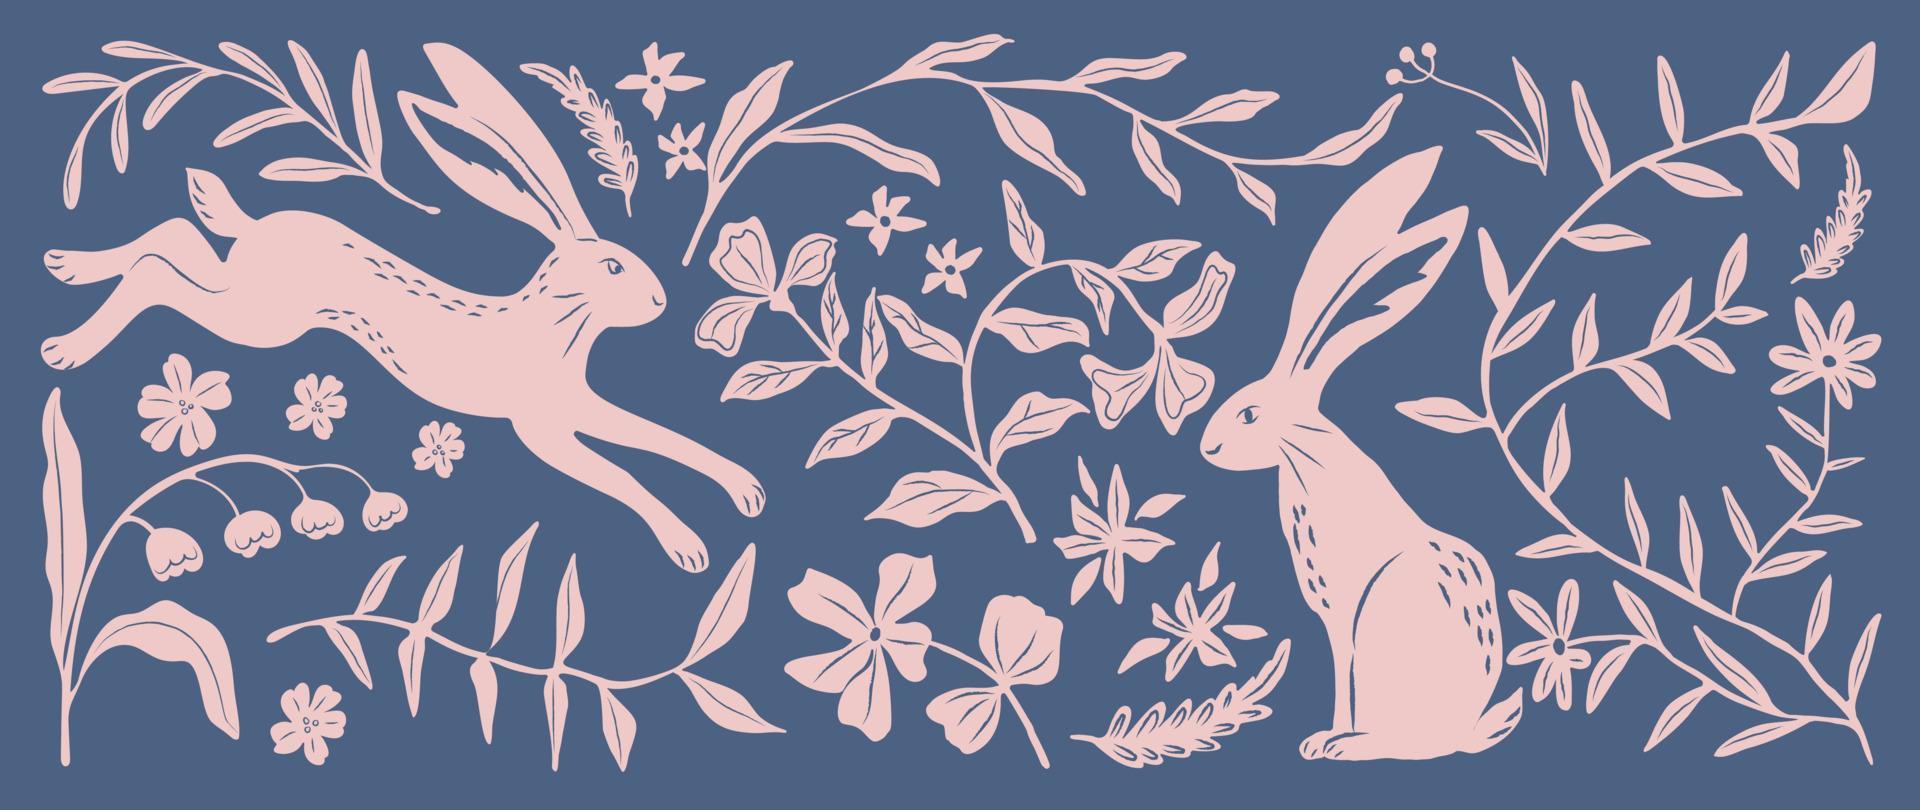 Matisse art background vector. Abstract natural hand drawn pattern design with rabbit, flower, leaves. Simple contemporary style illustrated Design for fabric, print, cover, banner, wallpaper. vector